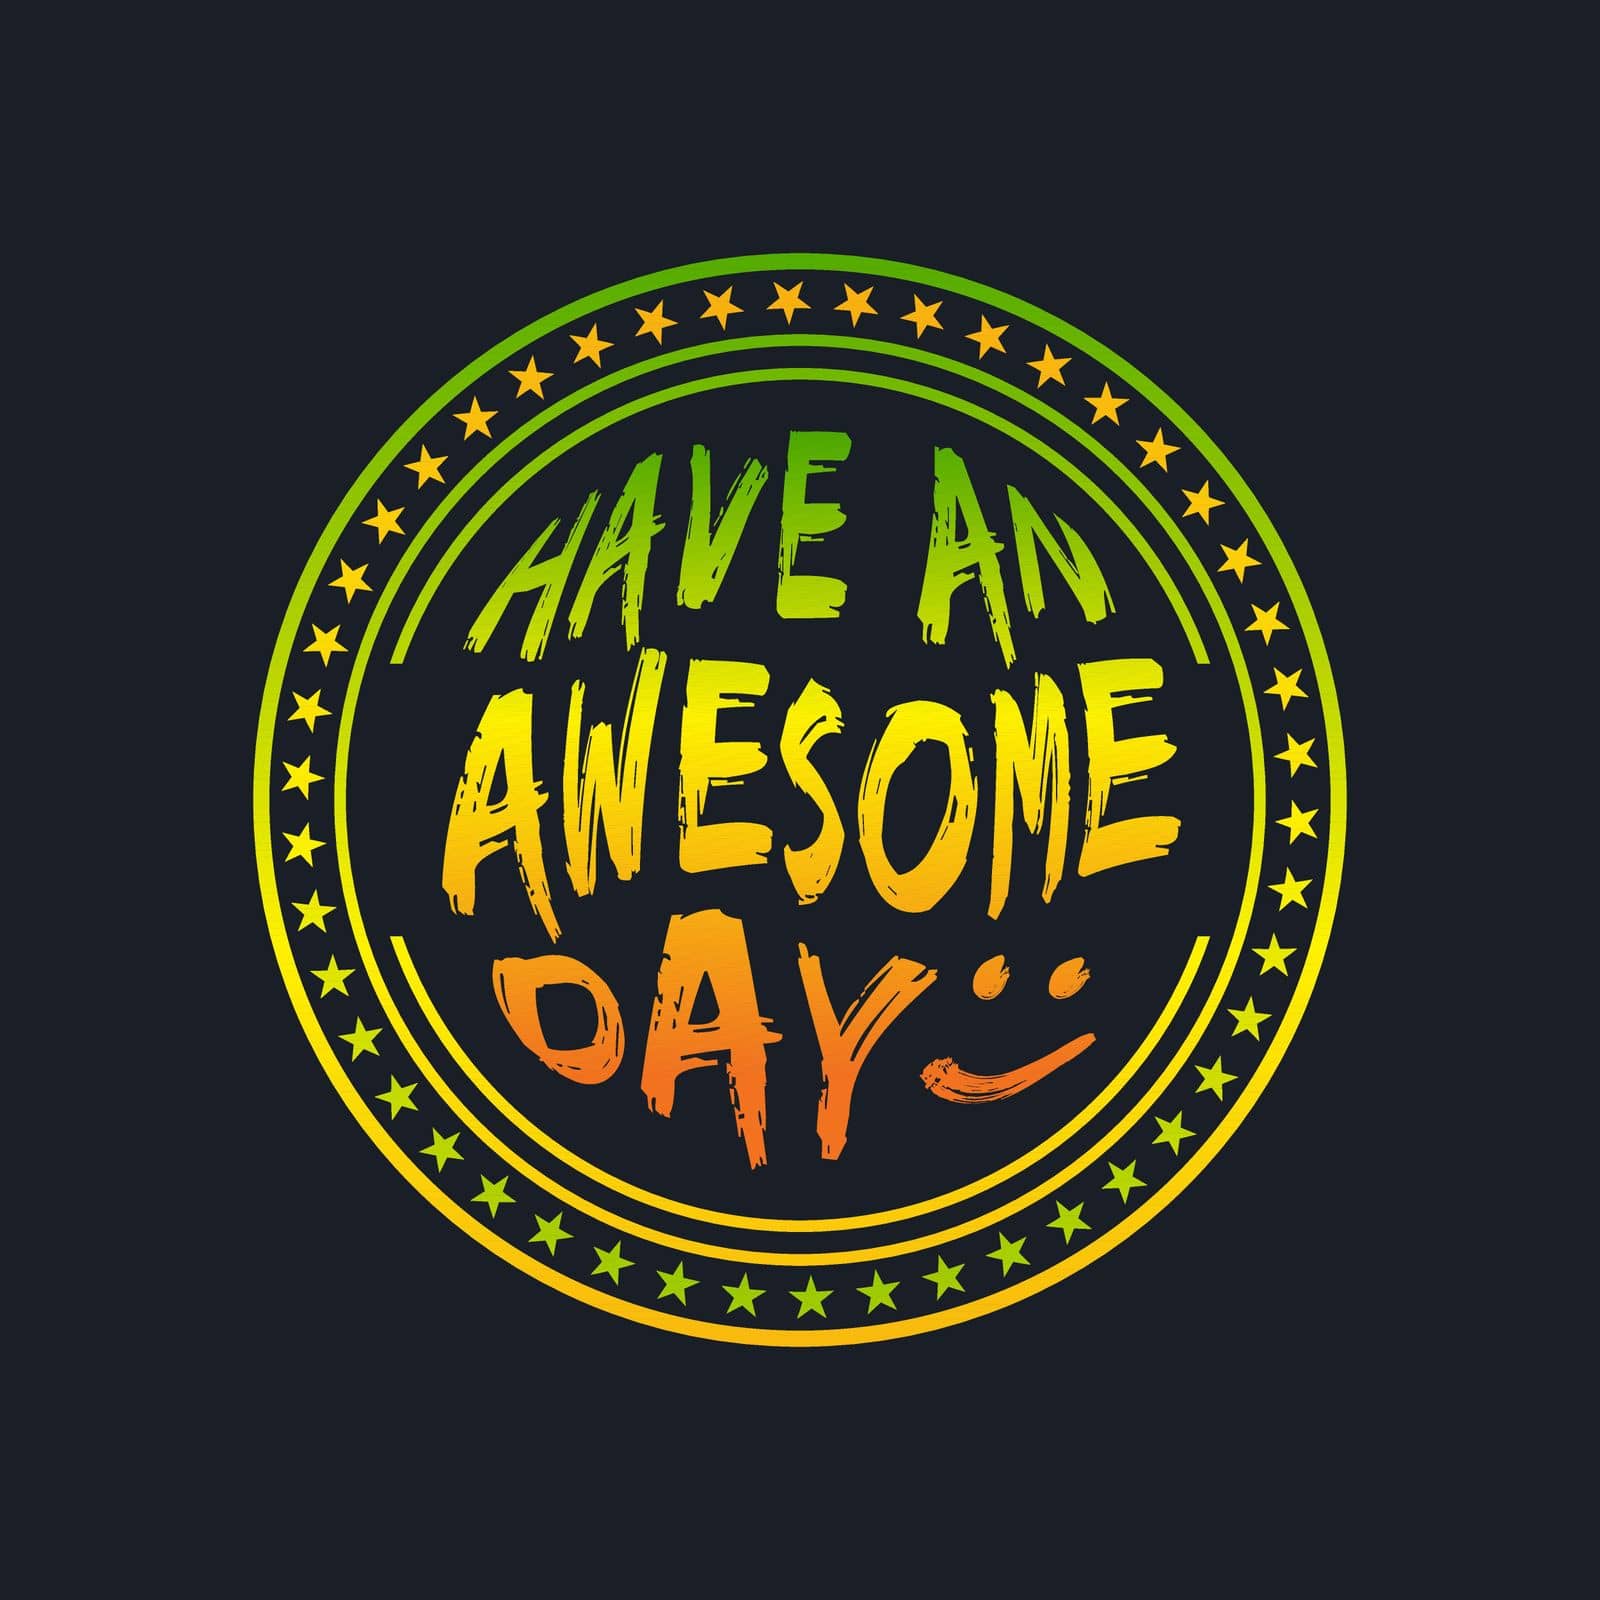 HAVE AN AWESOME DAY :), lettering typography in badge style design artwork. Editable, resizable, EPS 10, vector illustration.